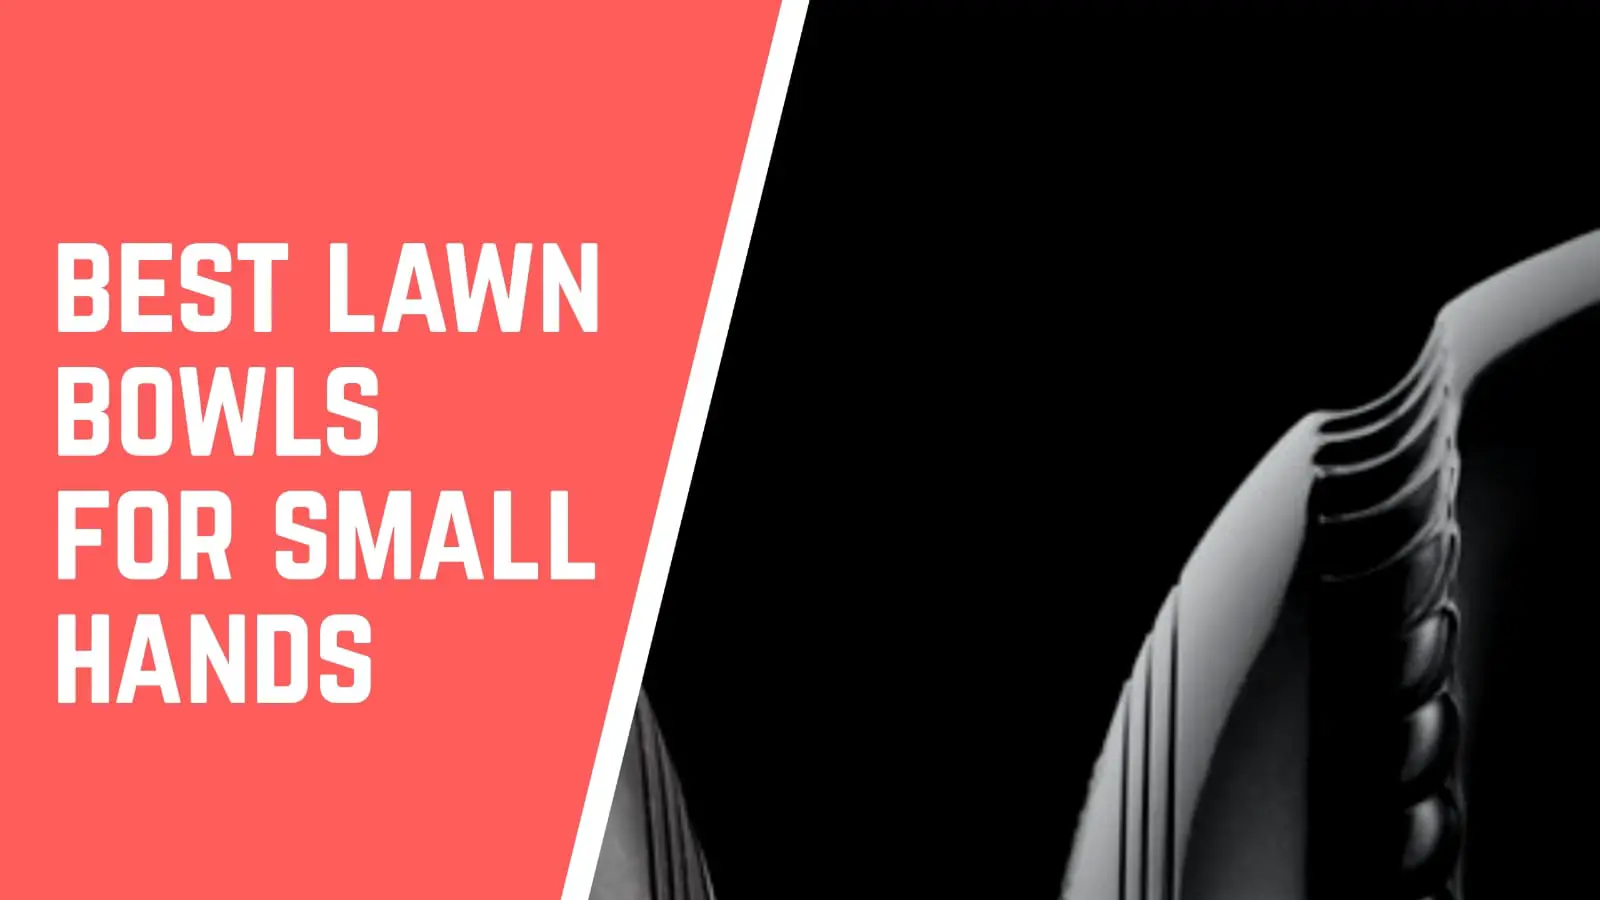 Best lawn bowls for small hands